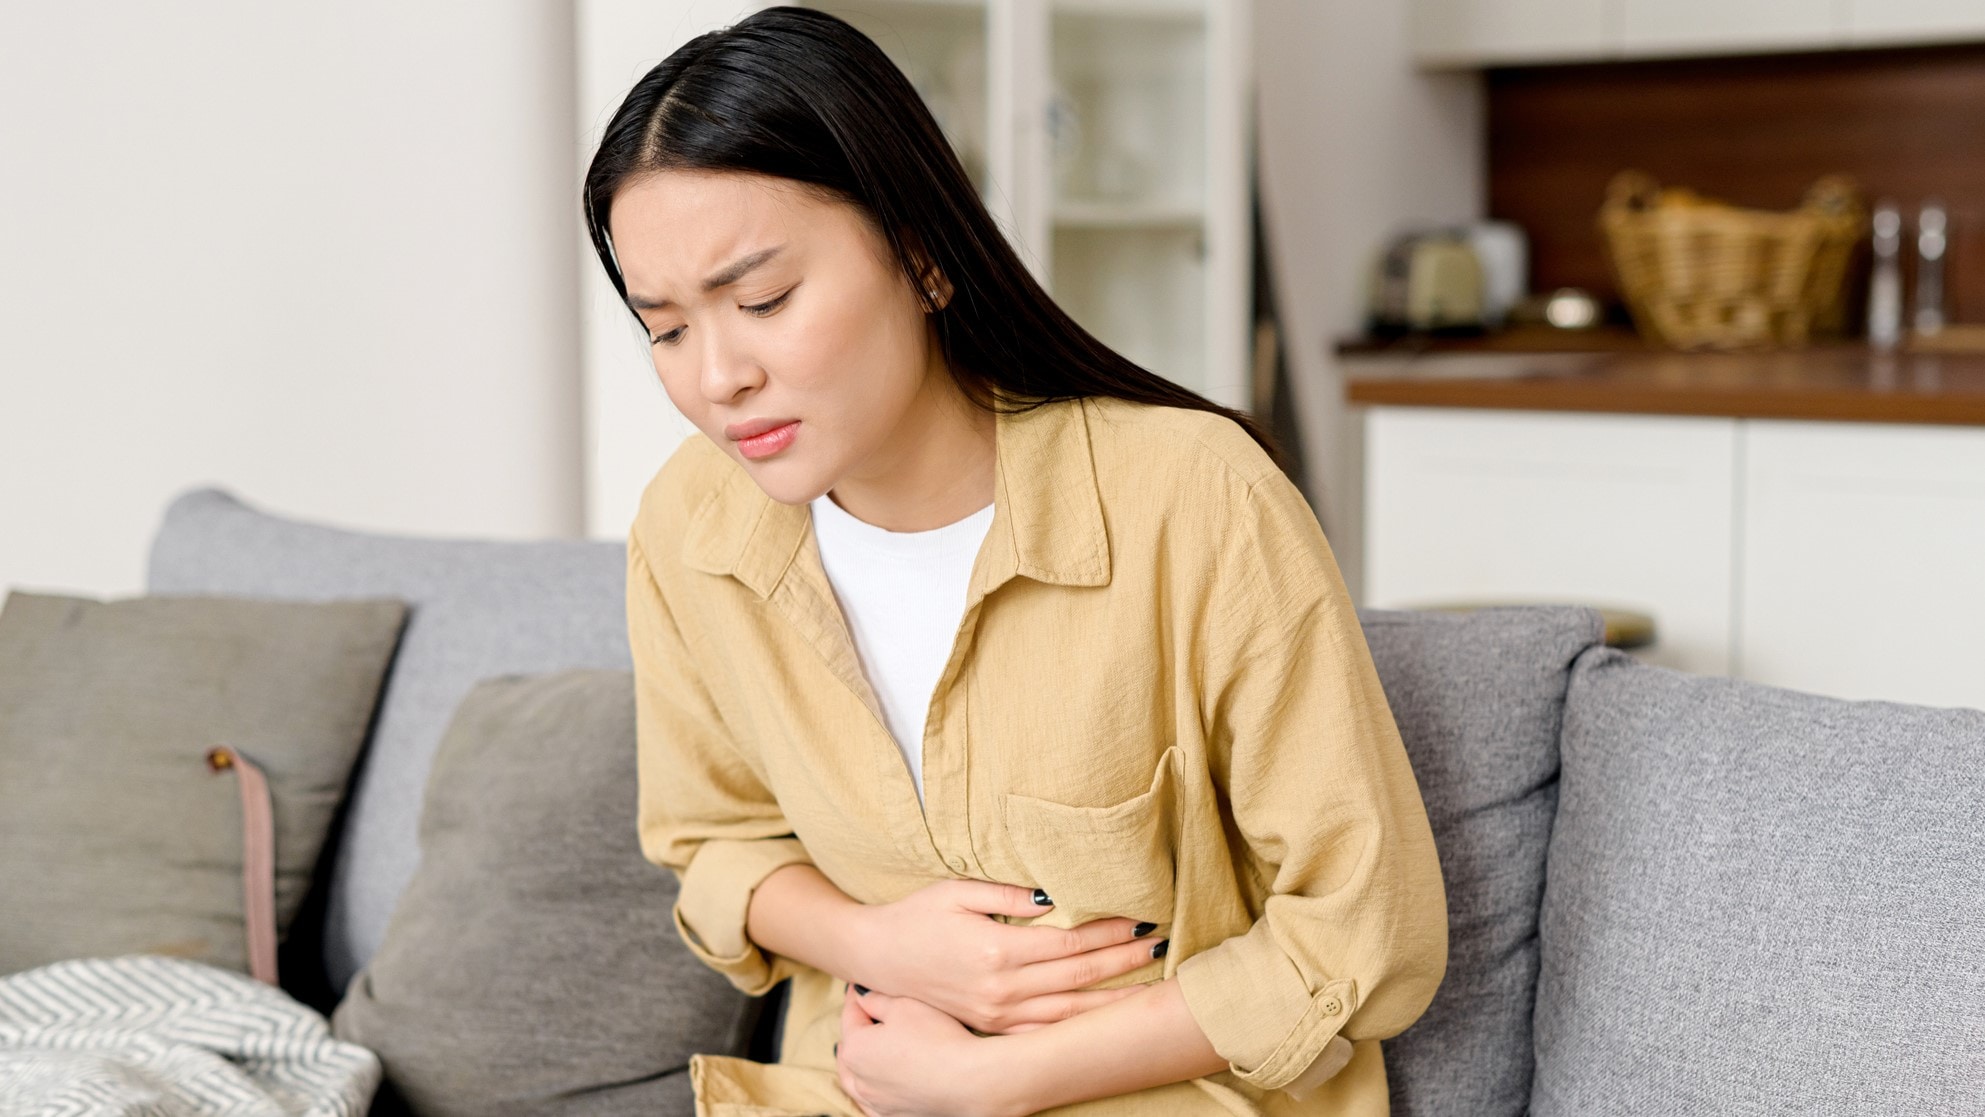 A person with long black hair sitting on a couch holding their cramping stomach.